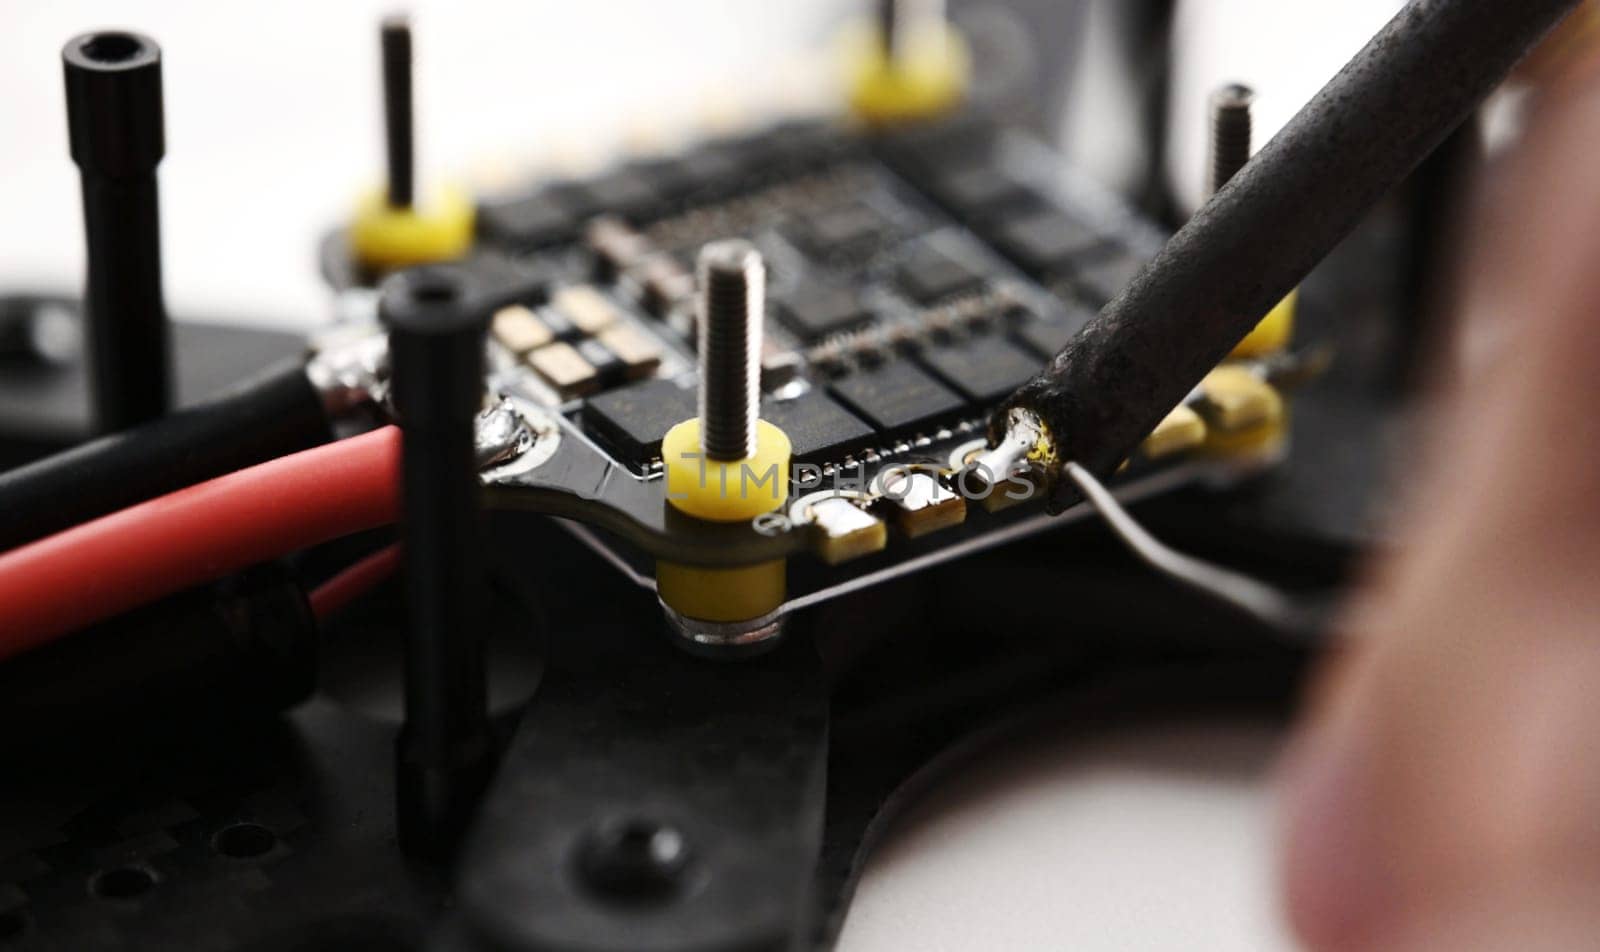 Process of soldering connections on microchip of fpv drone